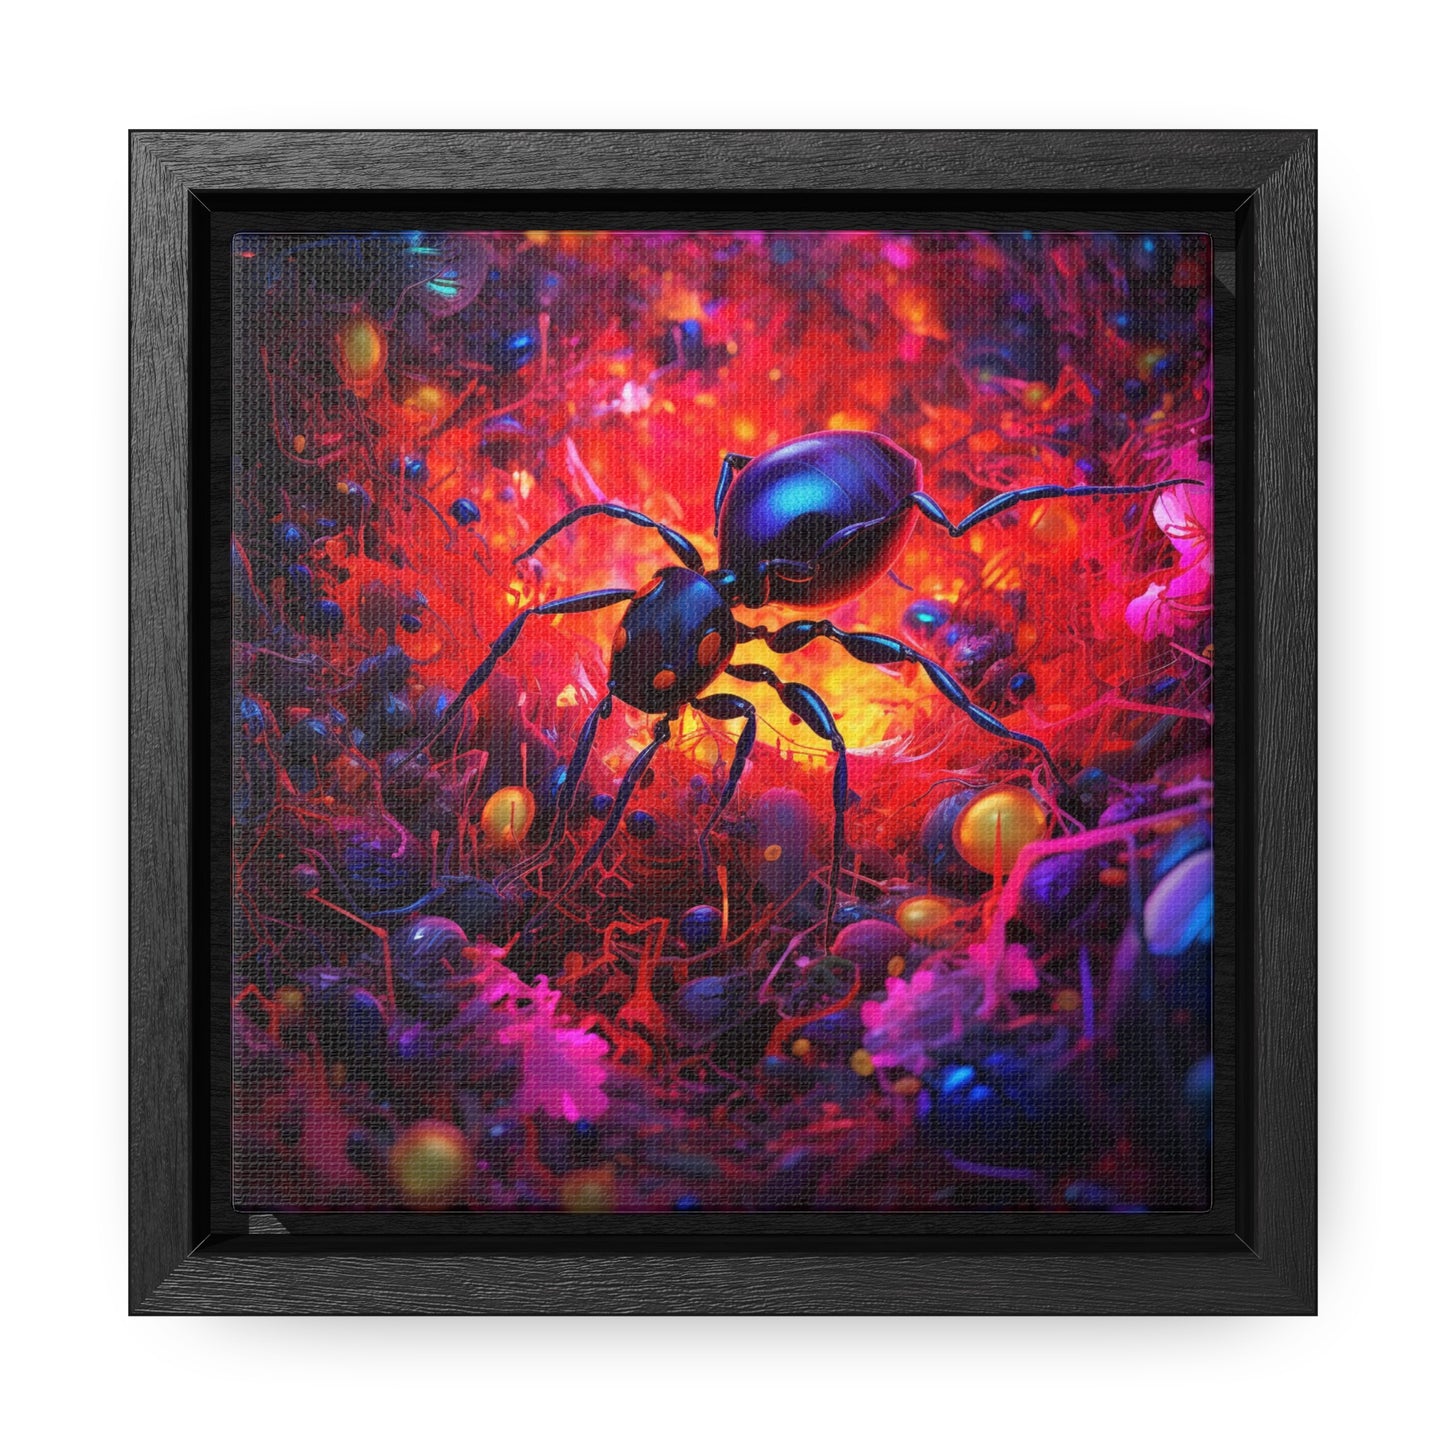 Gallery Canvas Wraps, Square Frame Ants Home 1